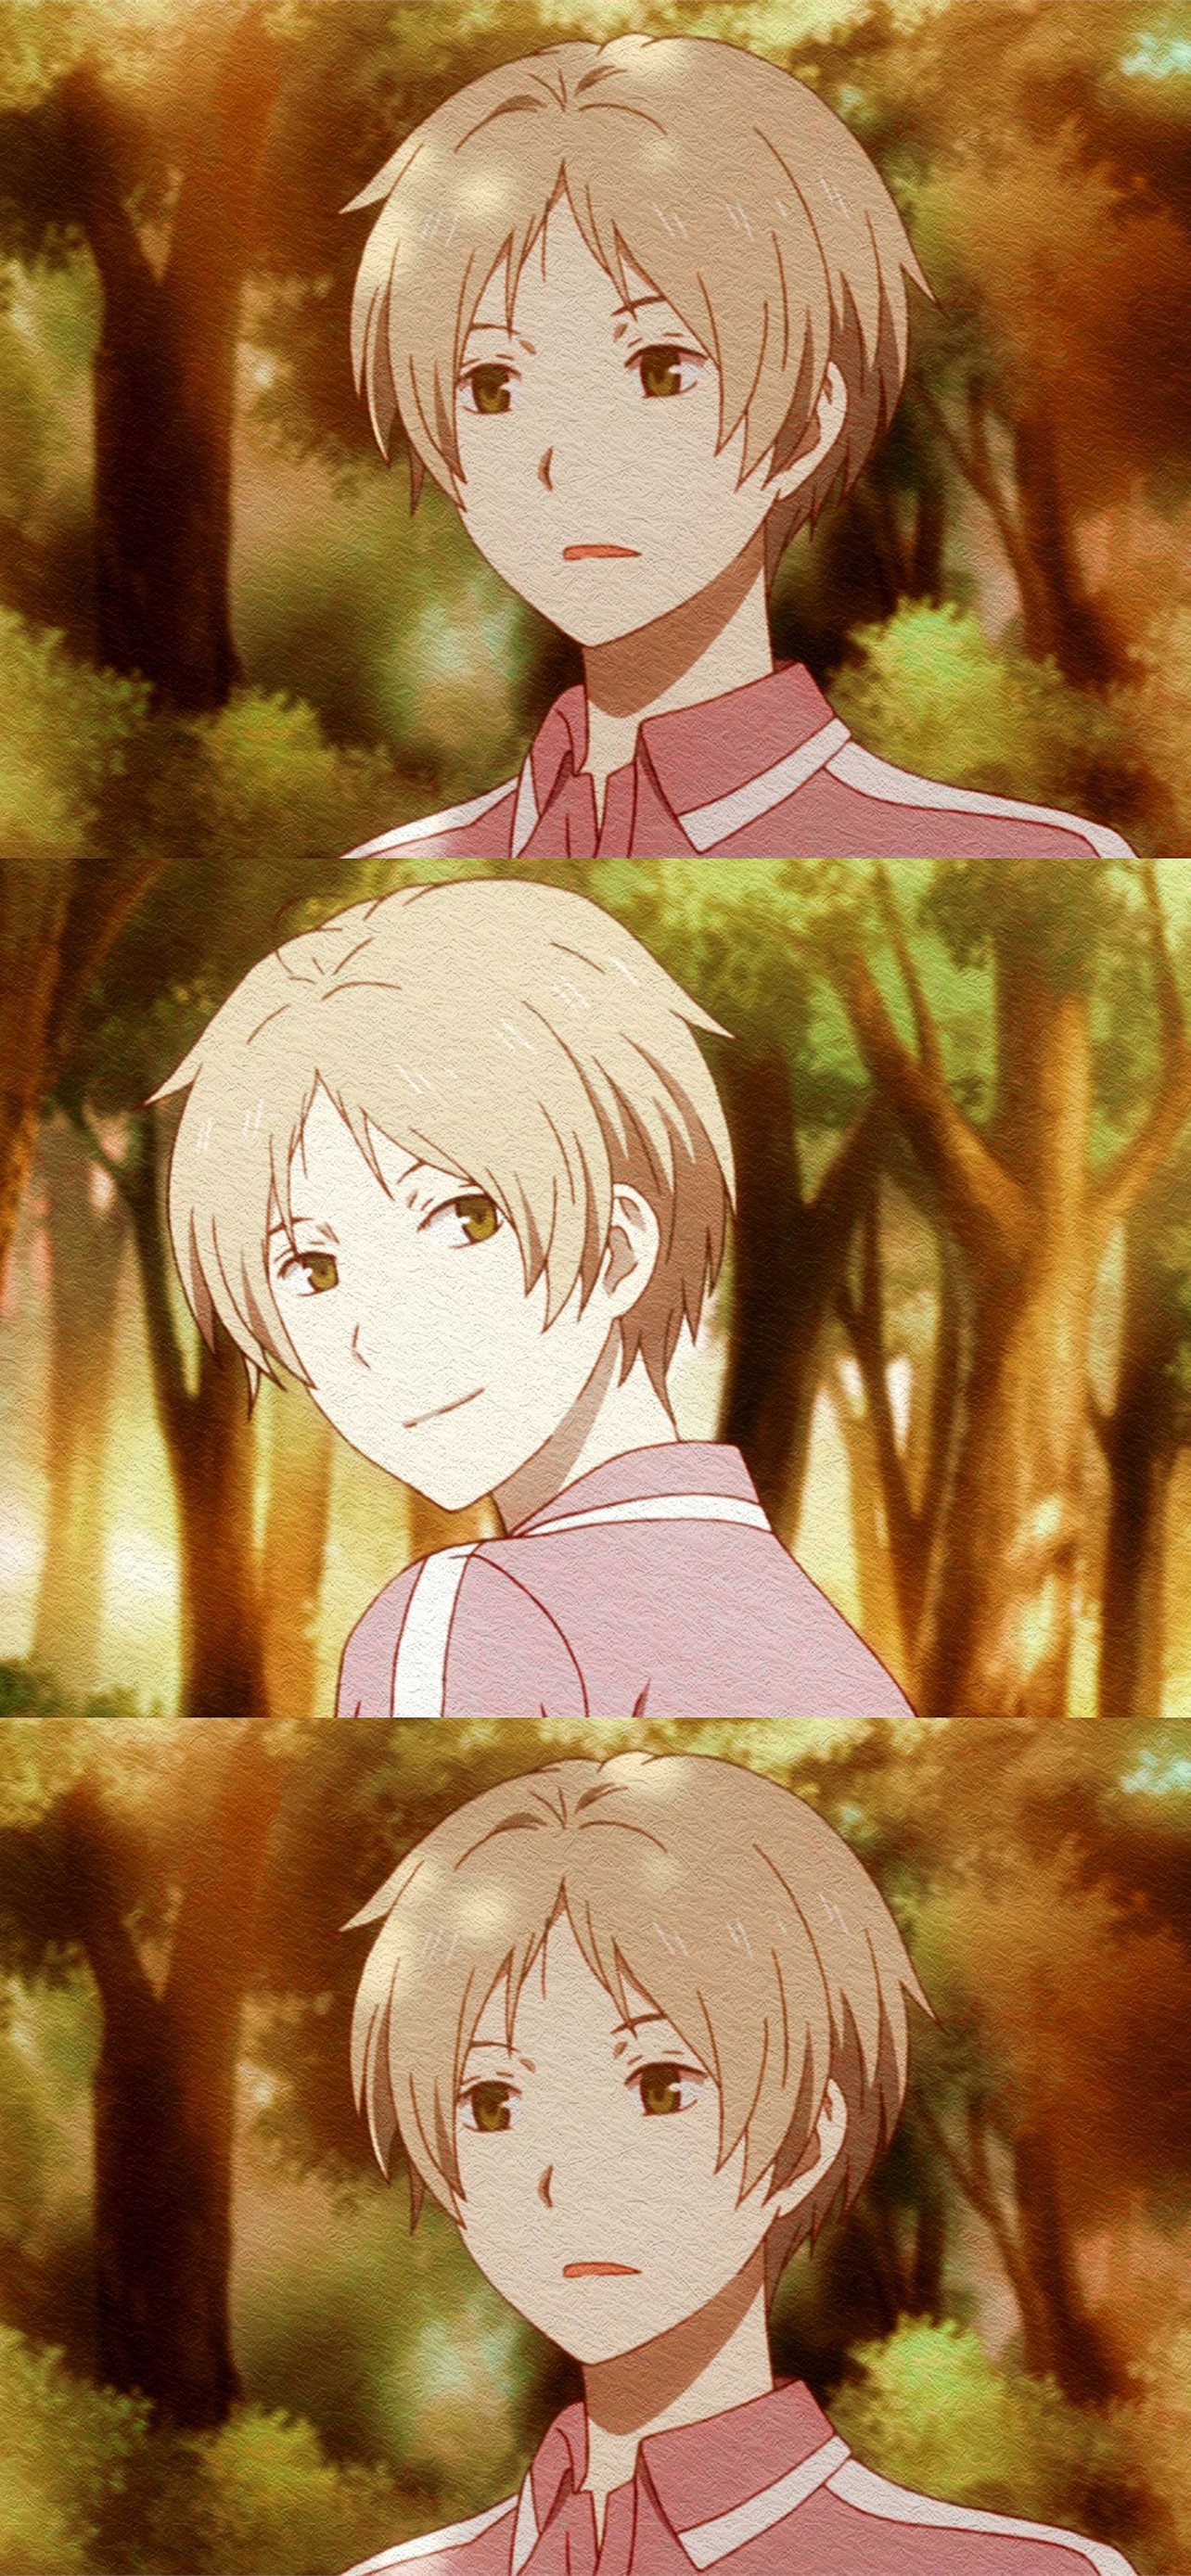 The Importance of Names in Natsume Yuujinchou  Analysis  The Anime View